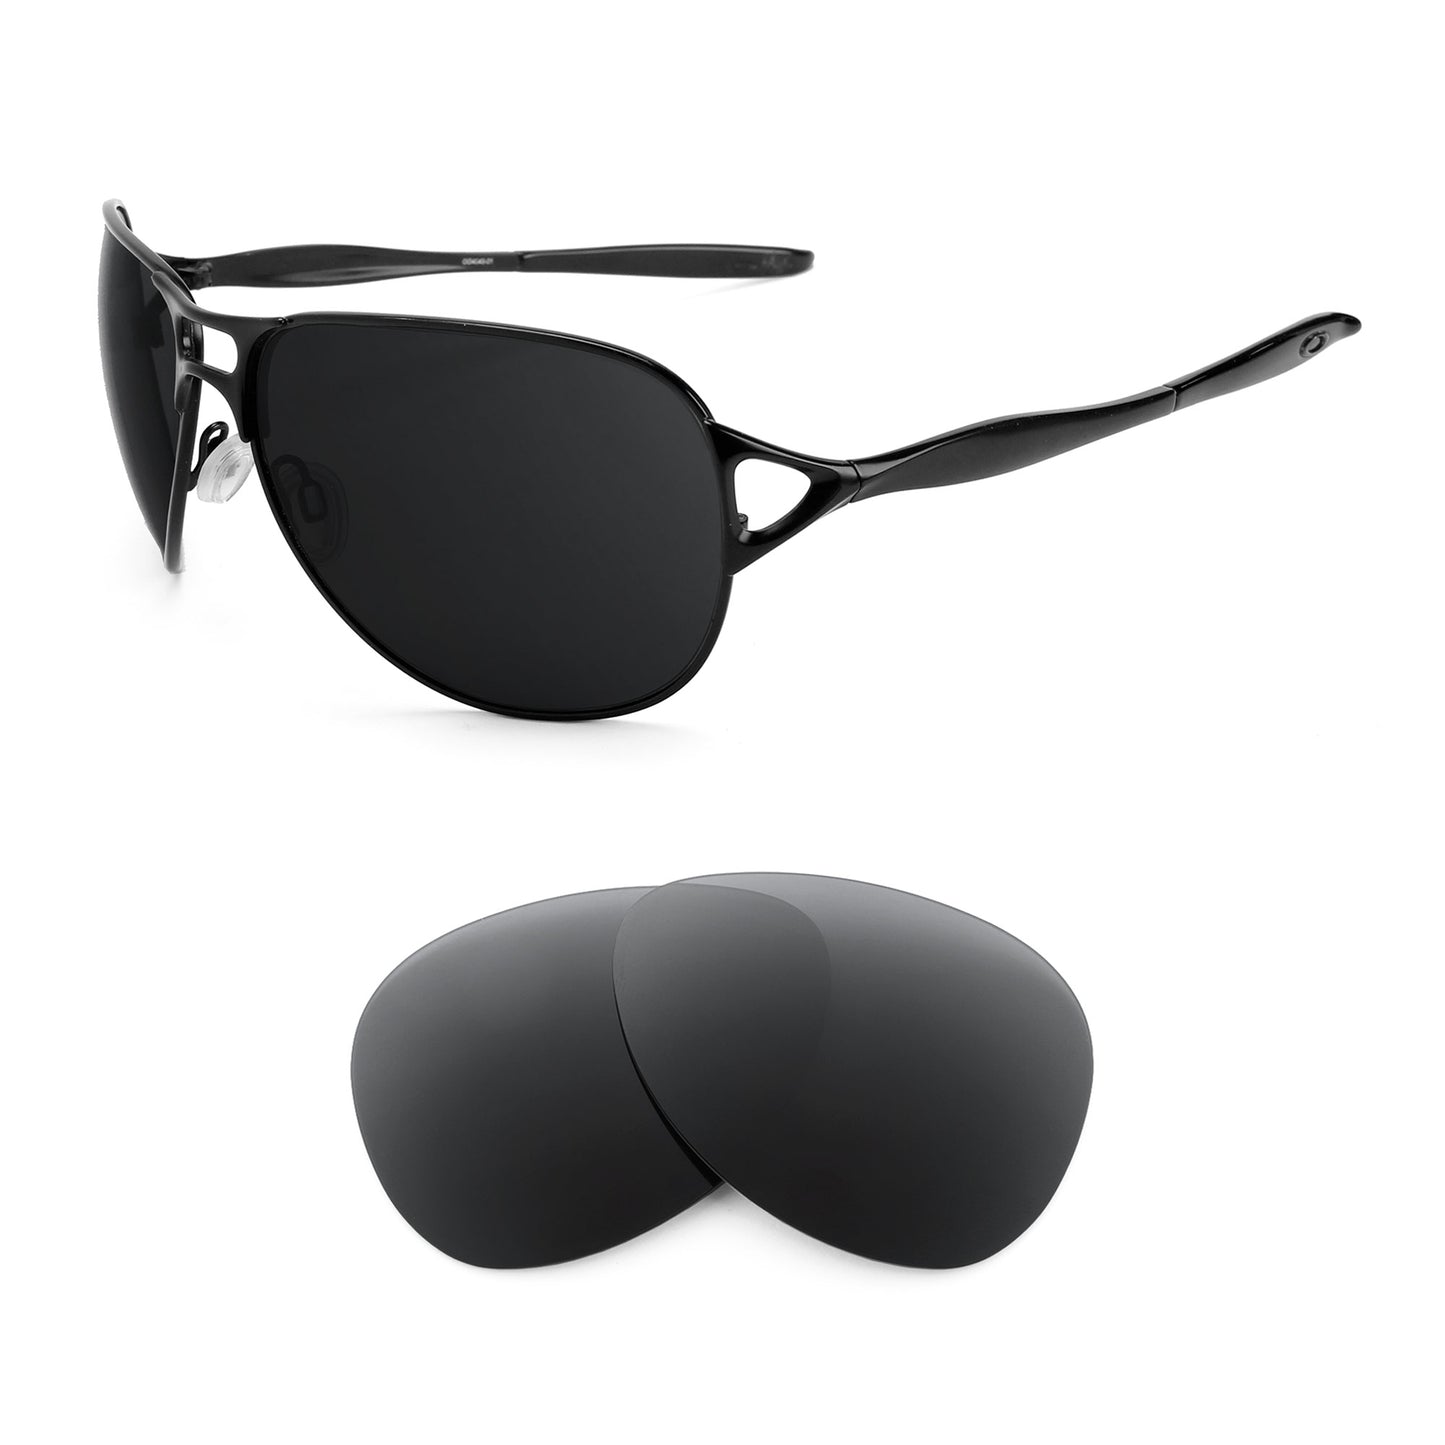 Oakley Hinder sunglasses with replacement lenses